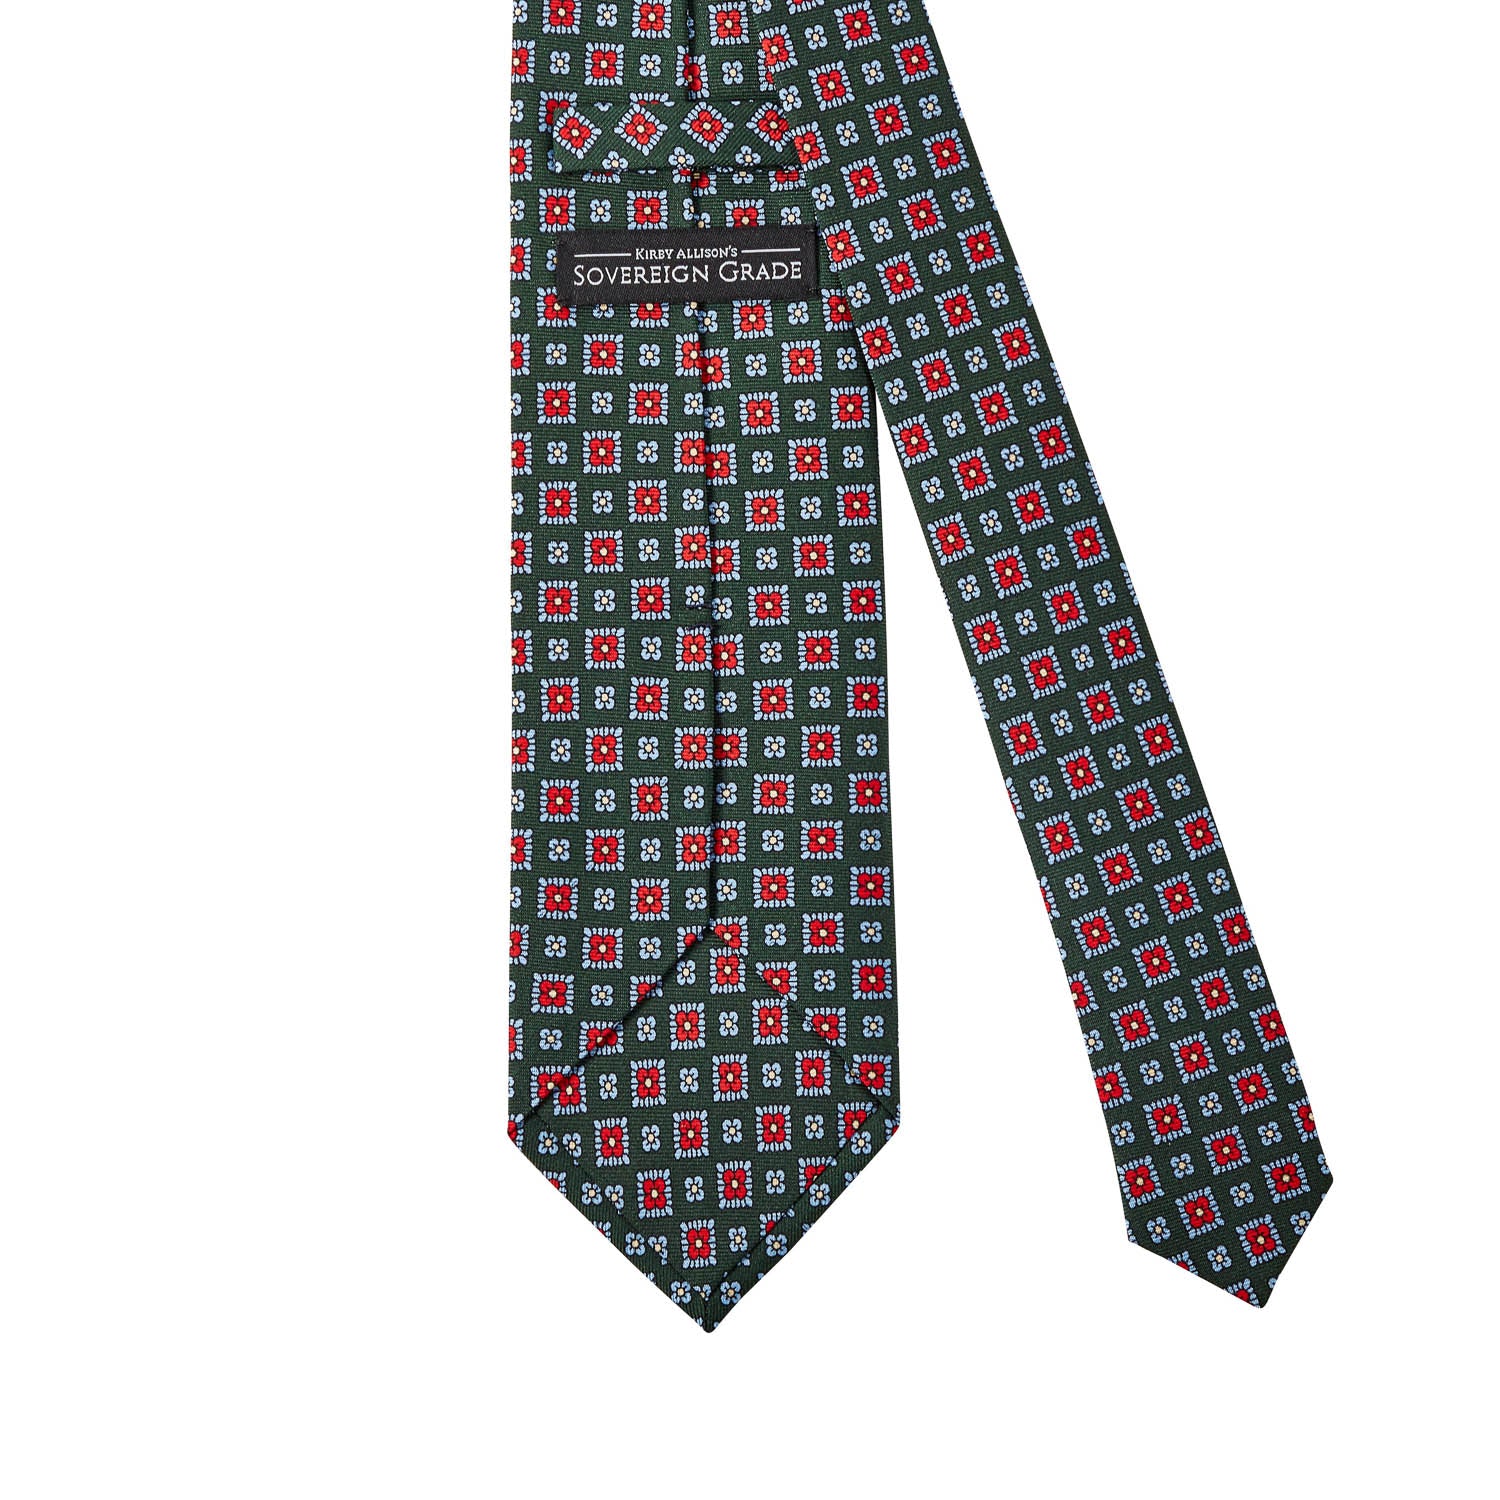 A Sovereign Grade Forest 36oz Printed Silk Maccesfield Tie with red and green squares on it, handmade in the United Kingdom using 100% English silk by KirbyAllison.com.